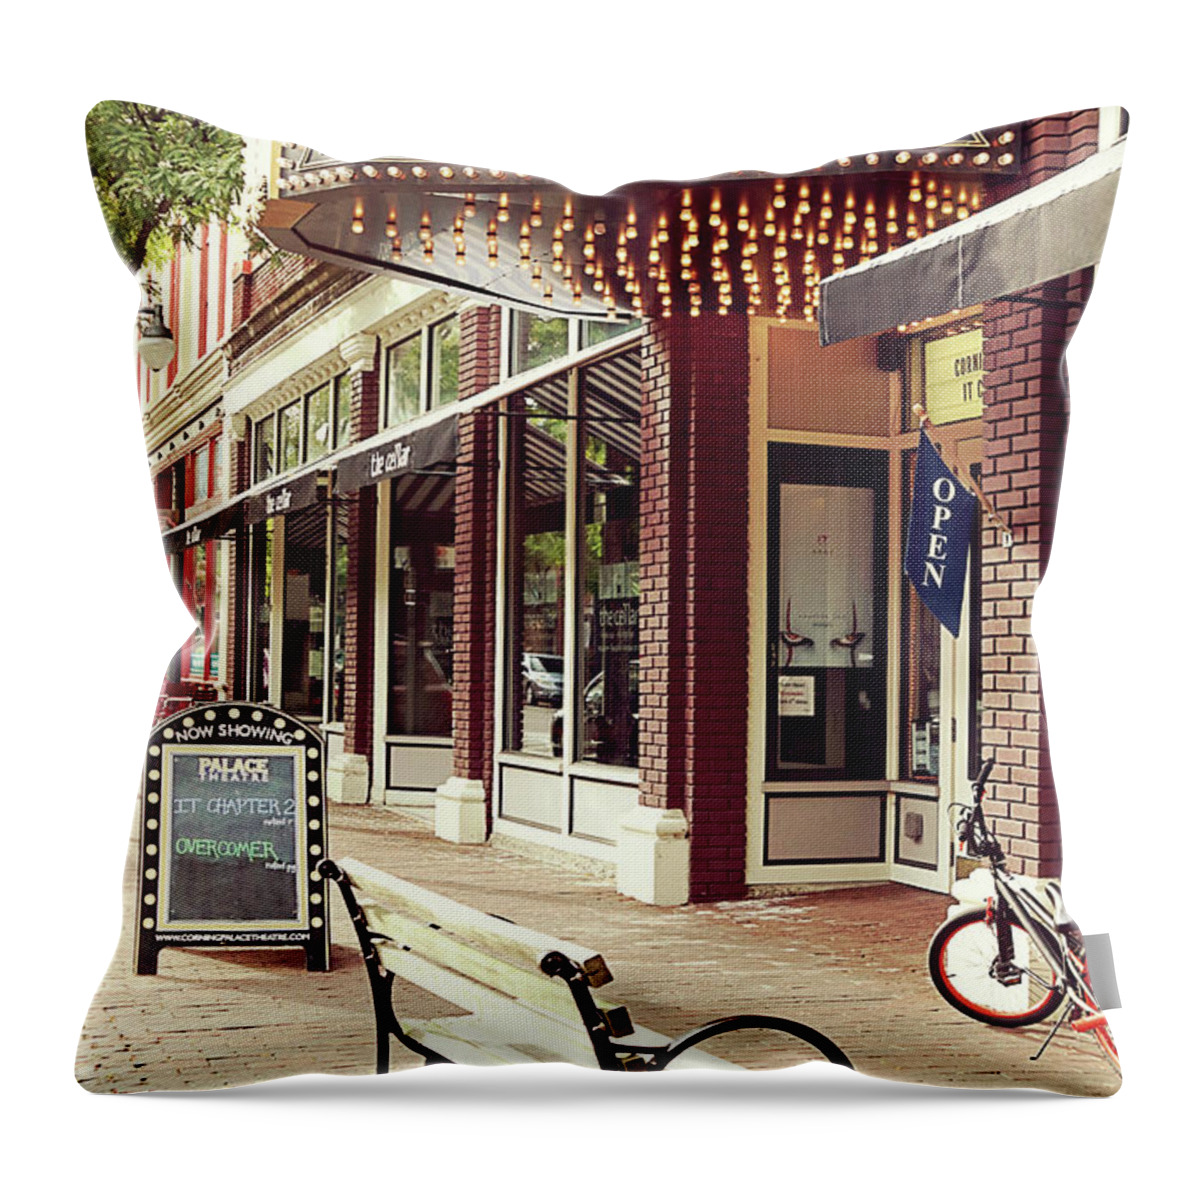 Movies Throw Pillow featuring the photograph Vintage Palace Theatre by Trina Ansel